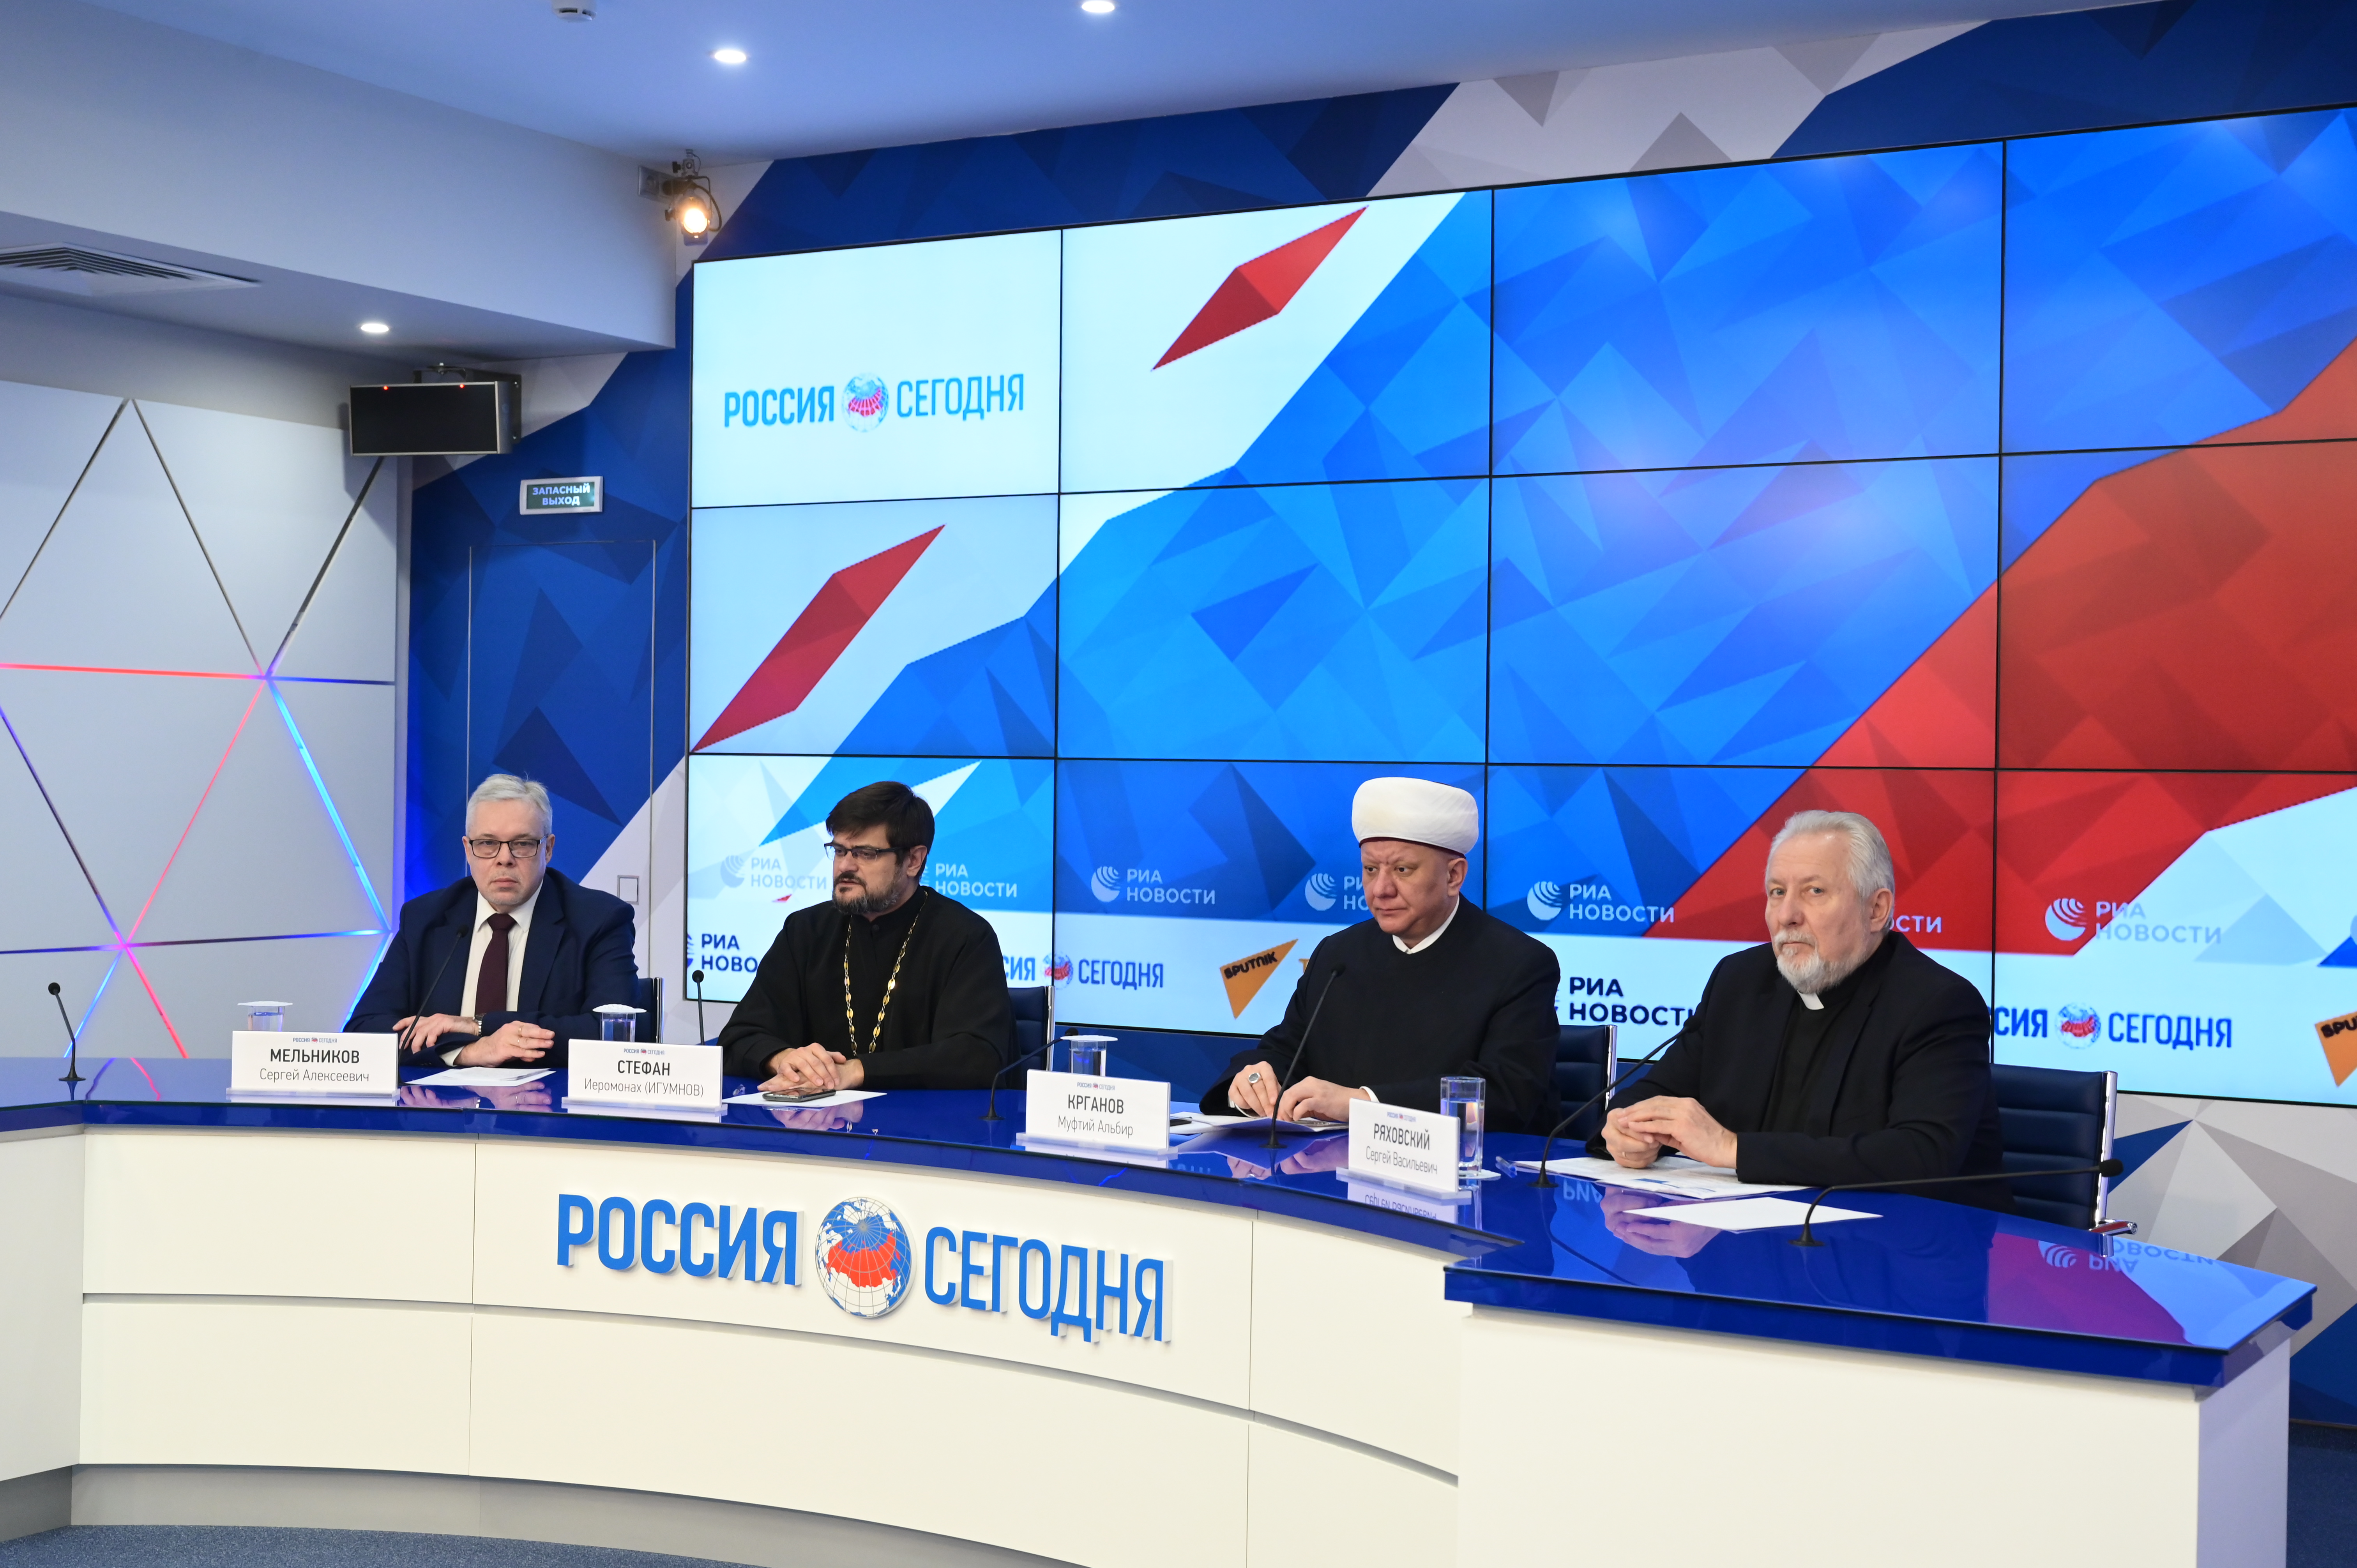 ALBIR- KHAZRAT KRGANOV TAKES PART IN A ROUND TABLE TO DISCUSS THE RIGHTS OF CHRISITIANS IN AFRICA